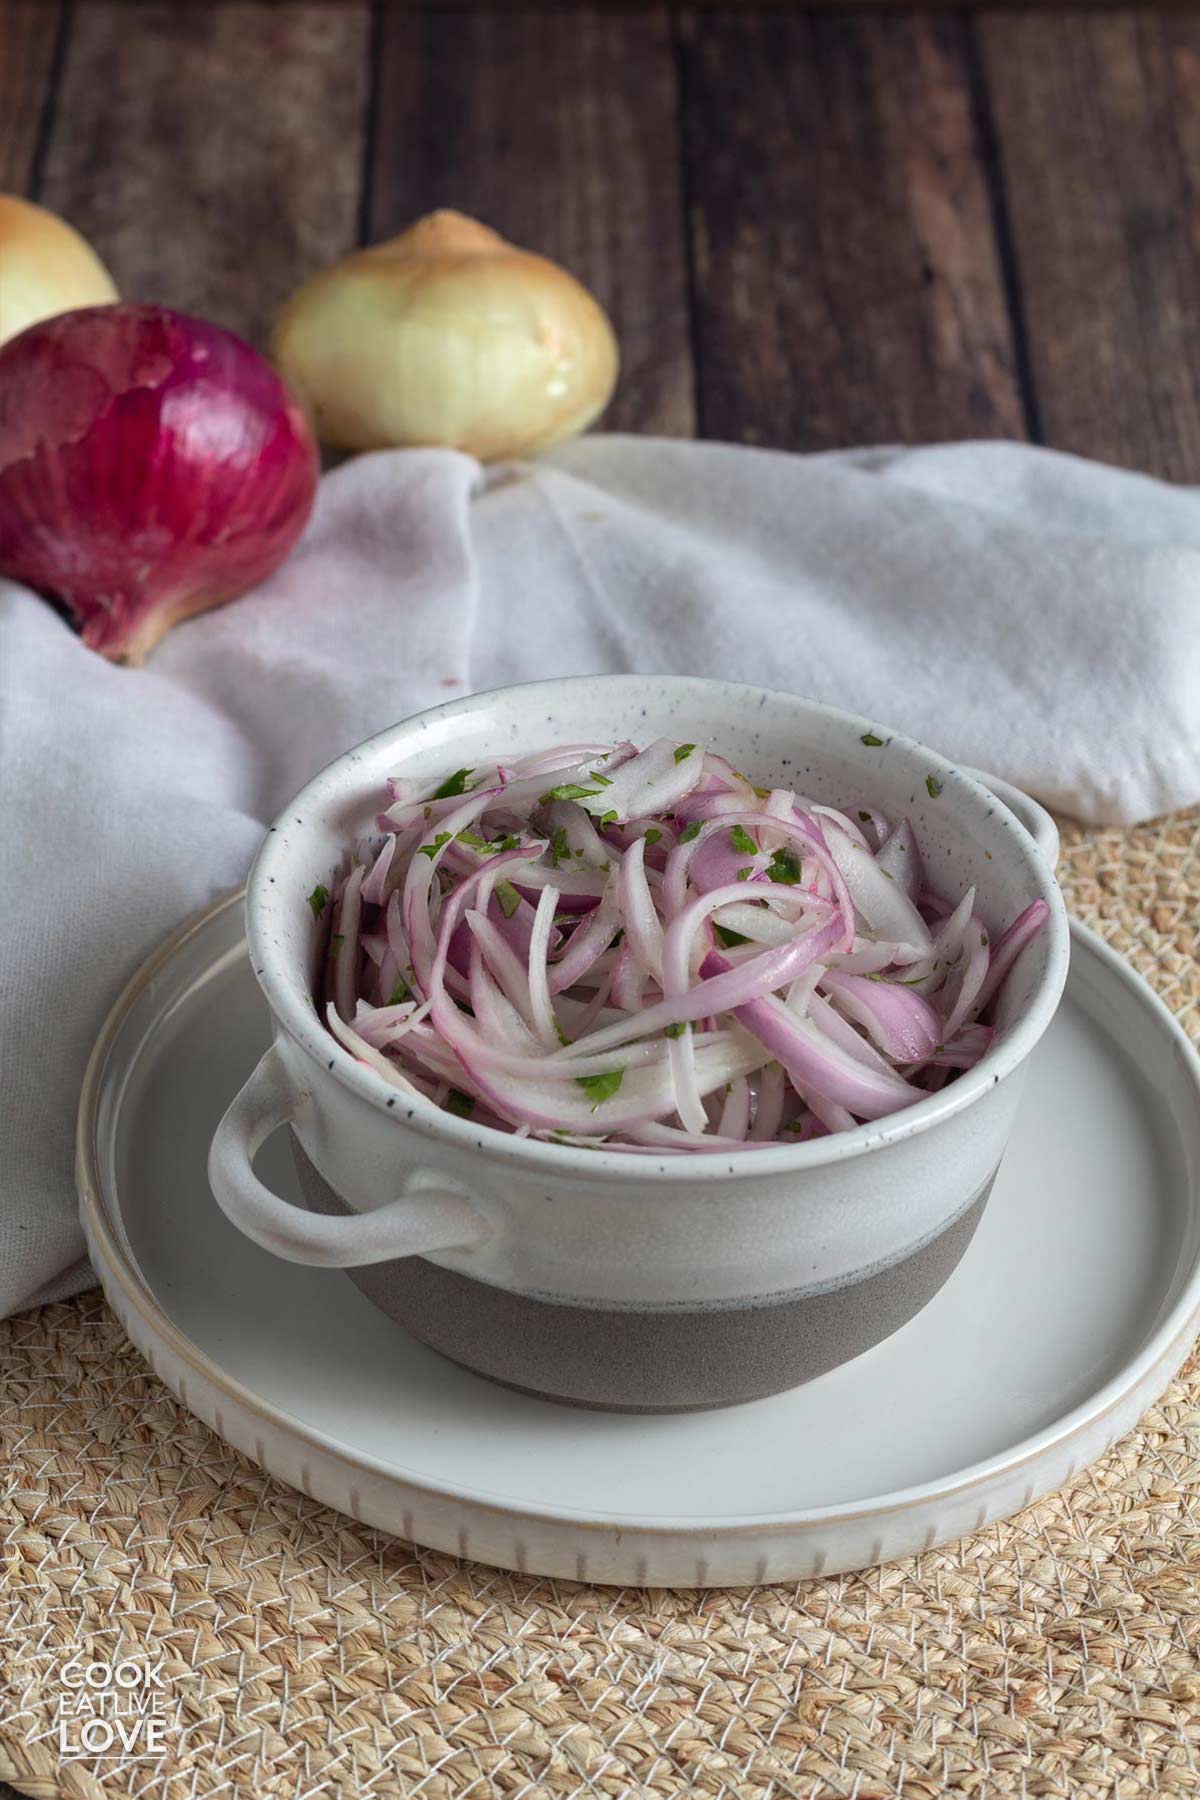 A bowl of red onion salad on a plate on the table.